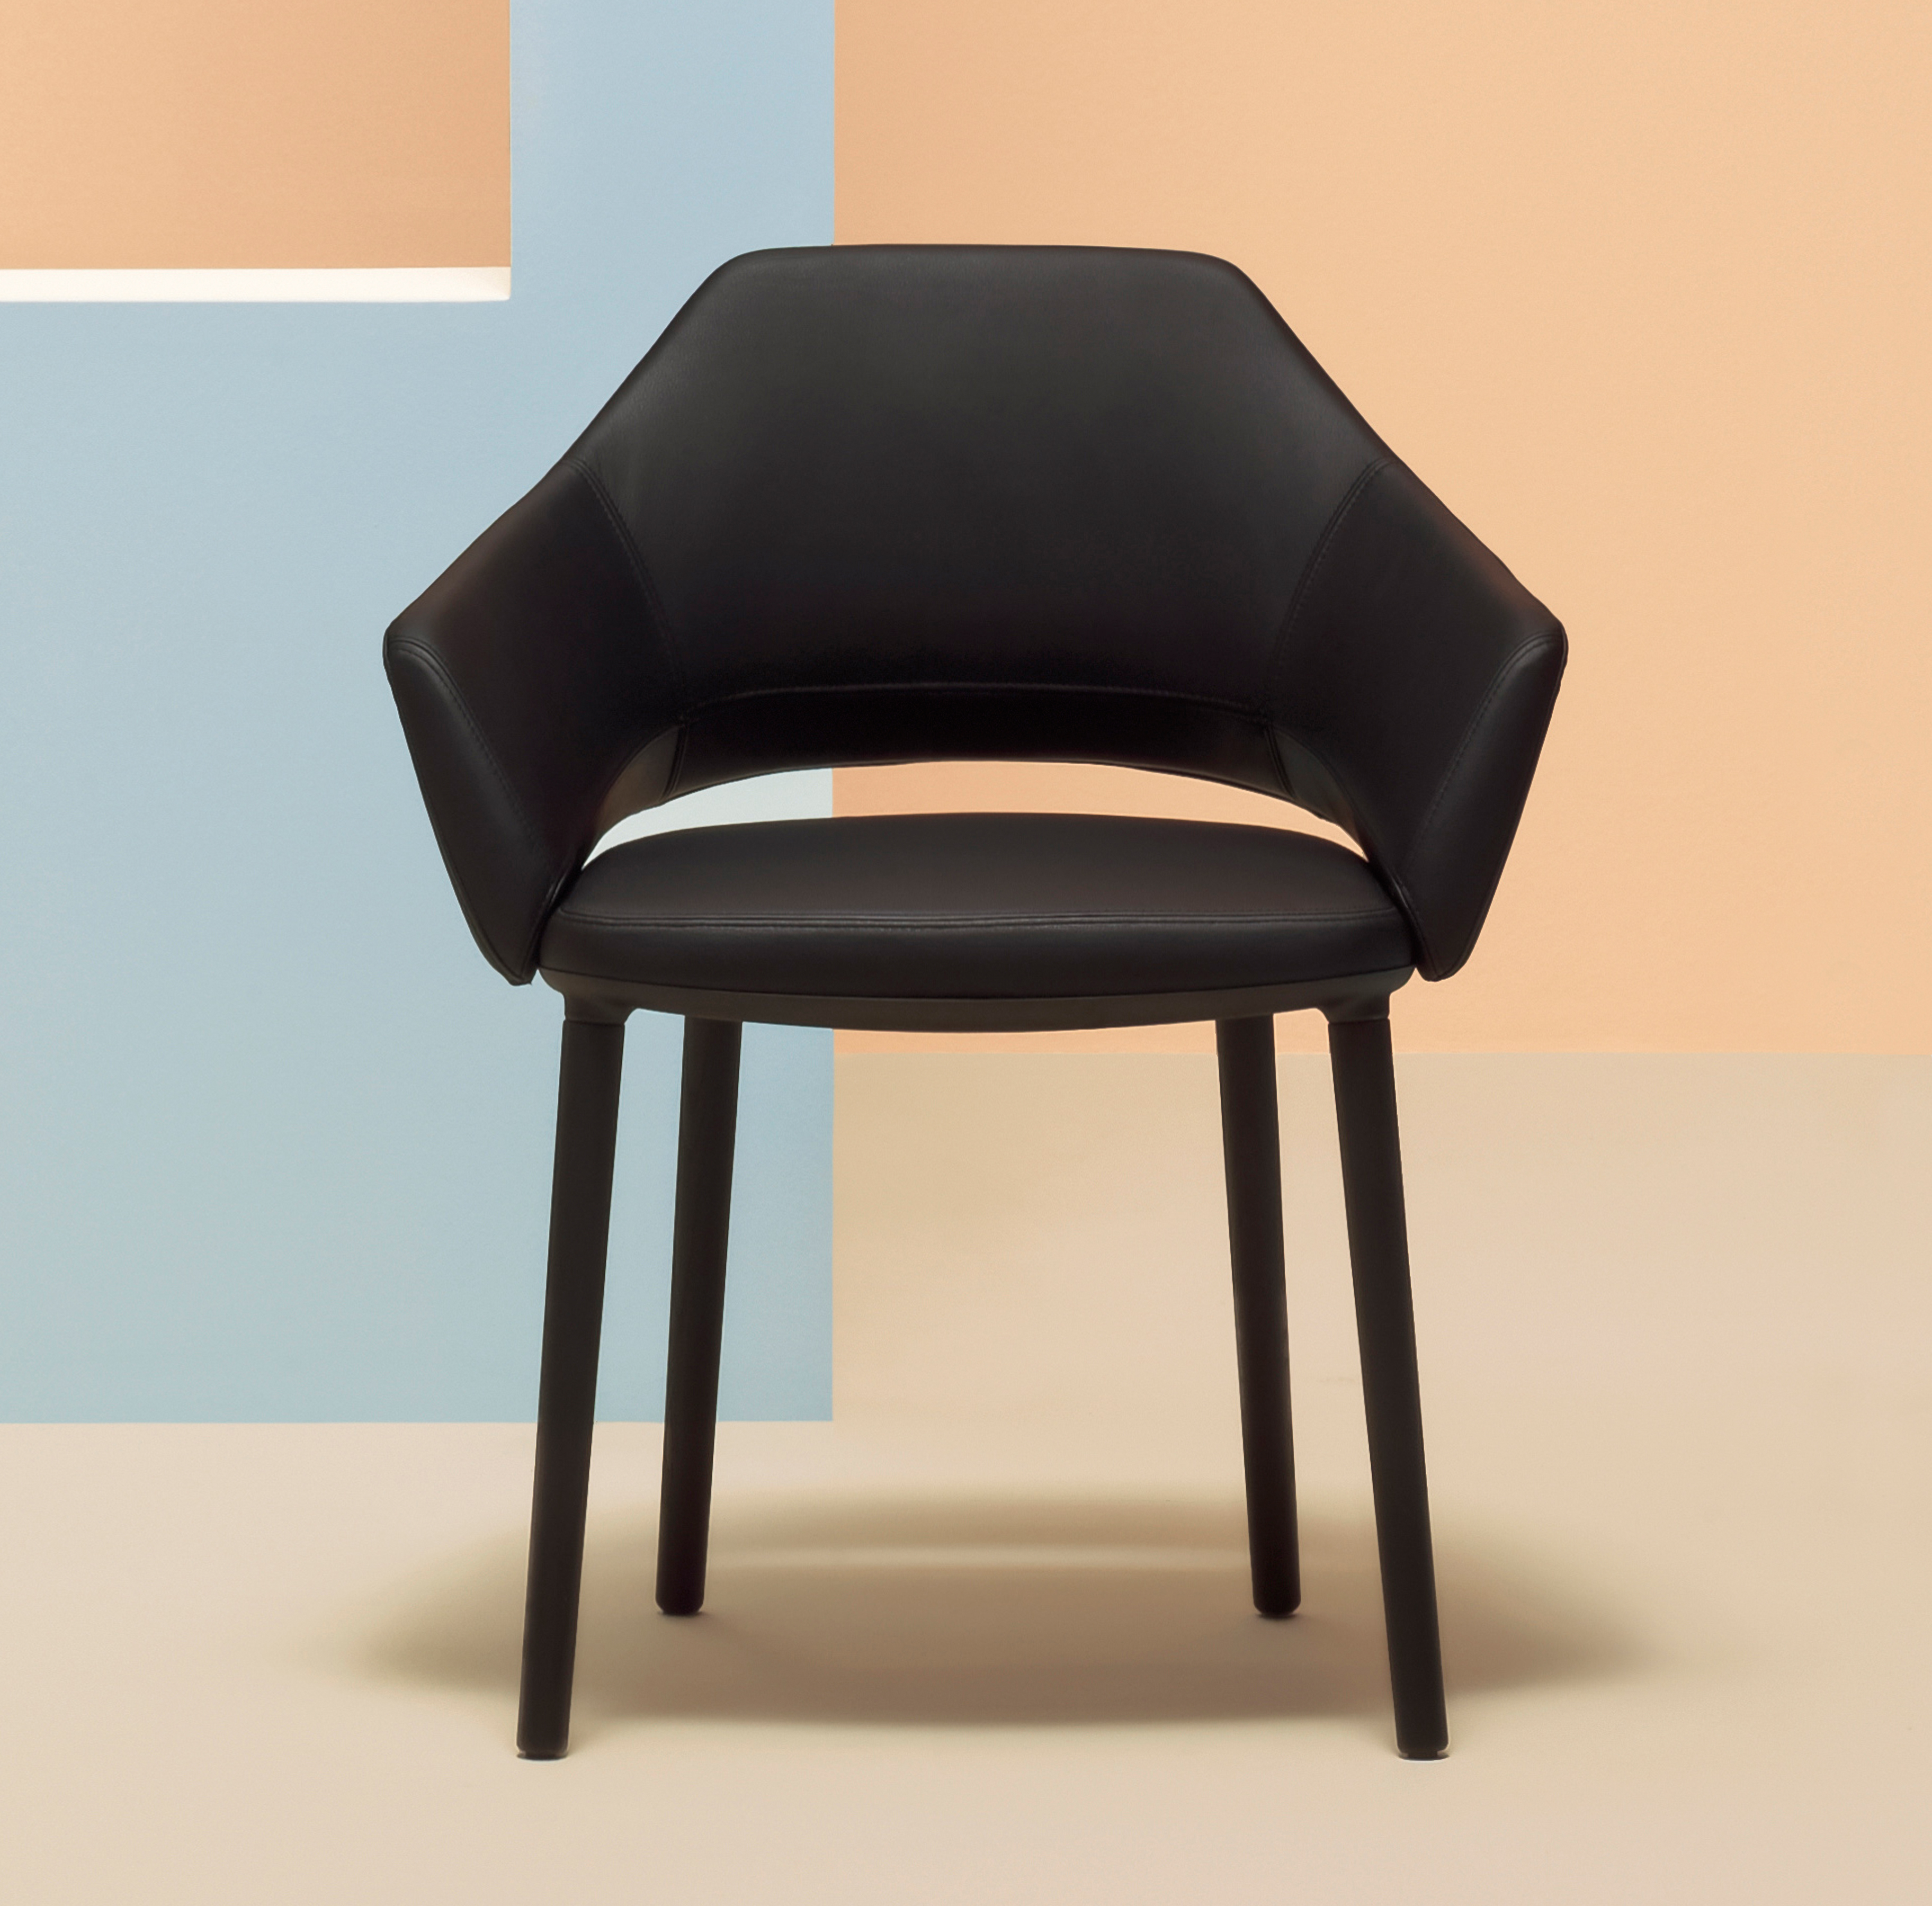 VIC Chair by Patrick Norguet for Pedrali